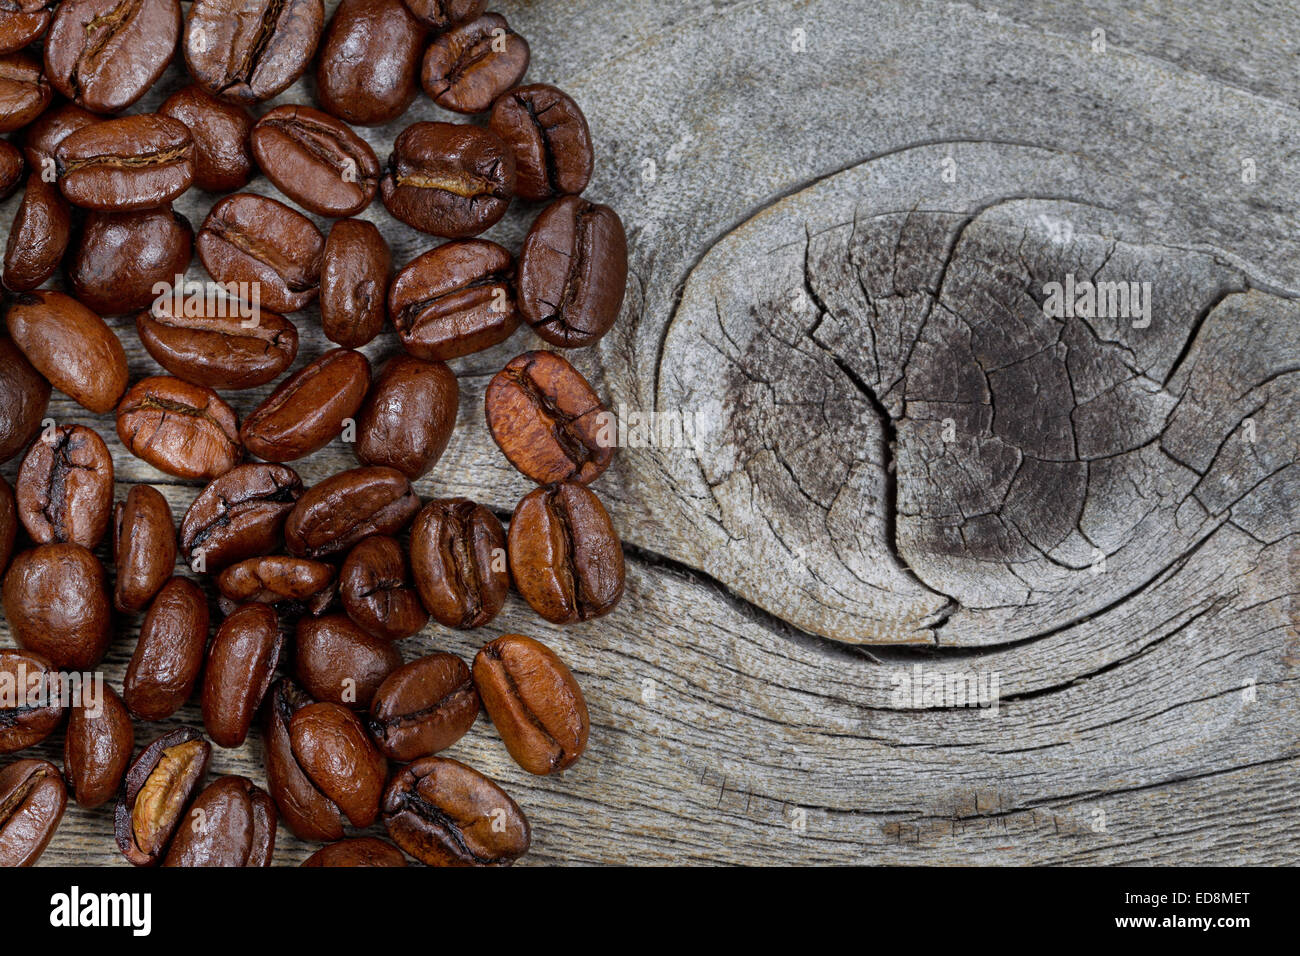 Close up of freshly roasted coffee whole beans on rustic naturally aged wood Stock Photo